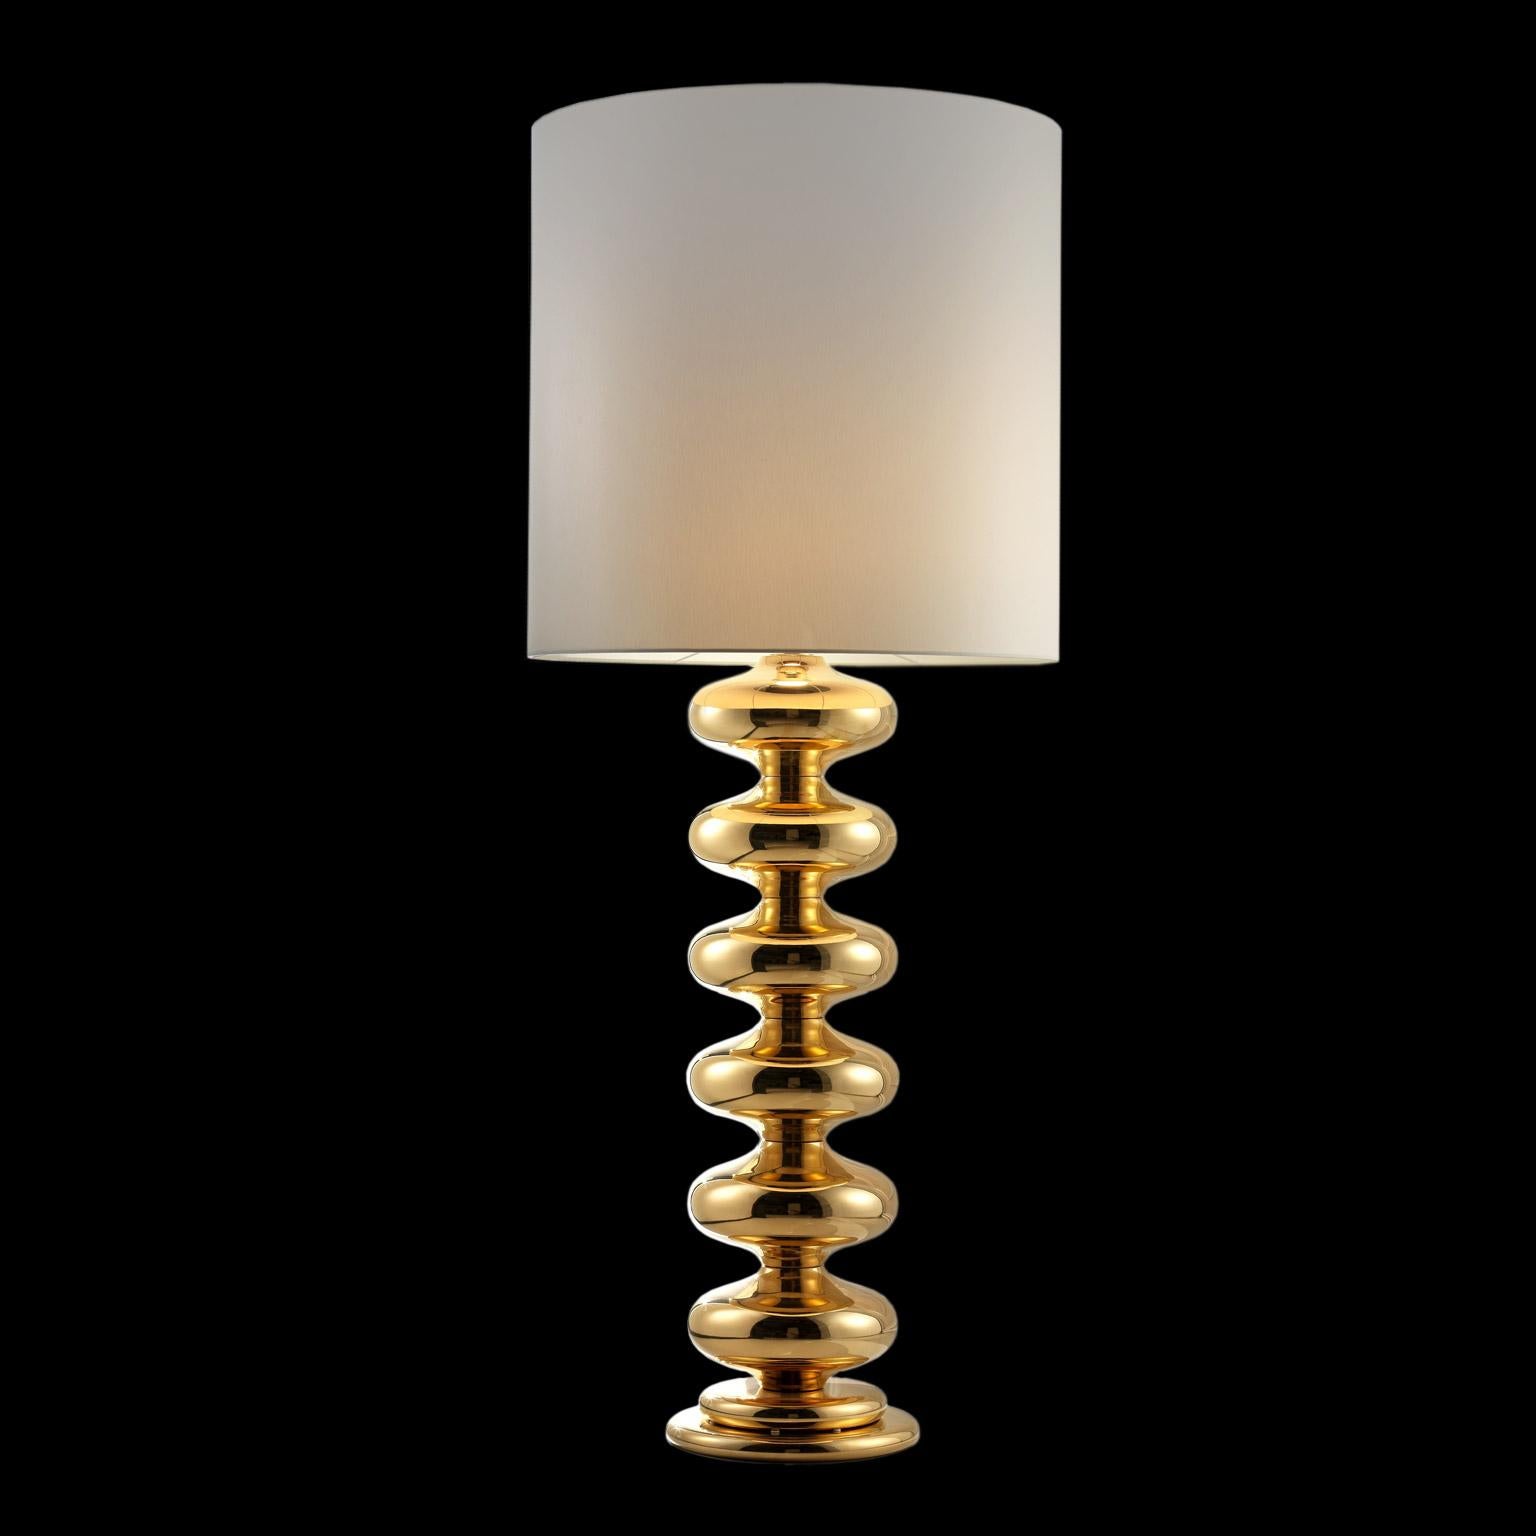 Ceramic lamp NIVES 3
cod. NV003
handcrafted in 24-karat gold 
with cotton lampshade

Measures: 
H. 150.0 cm.
Dm. 50.0 cm.